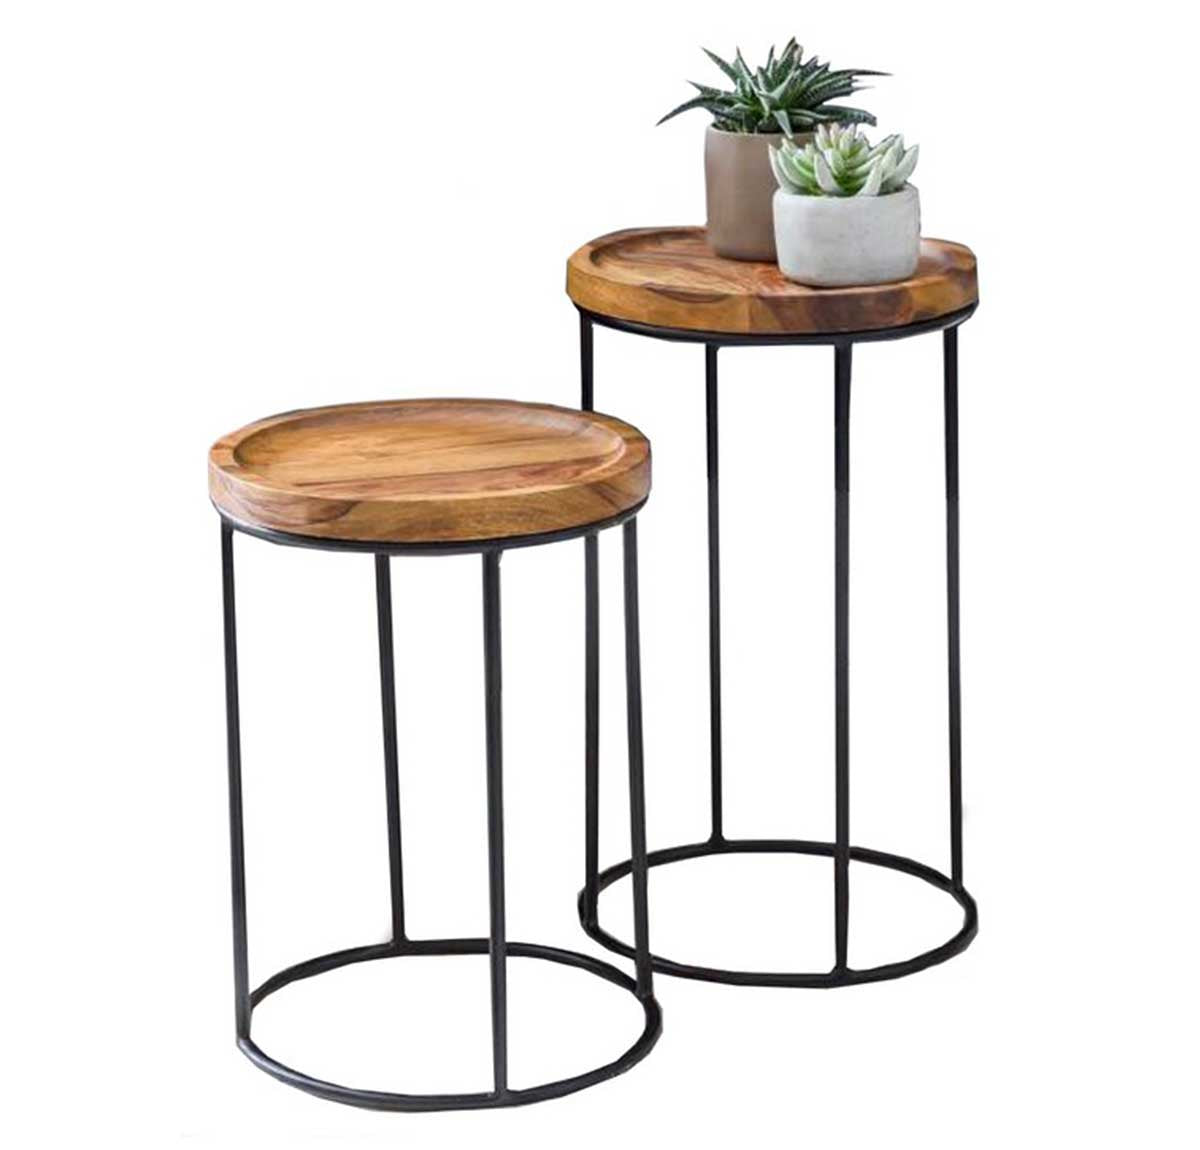 Set Of 2 Side Tables - Wood & Metal | Side Tables | Small Furniture | Home Decor